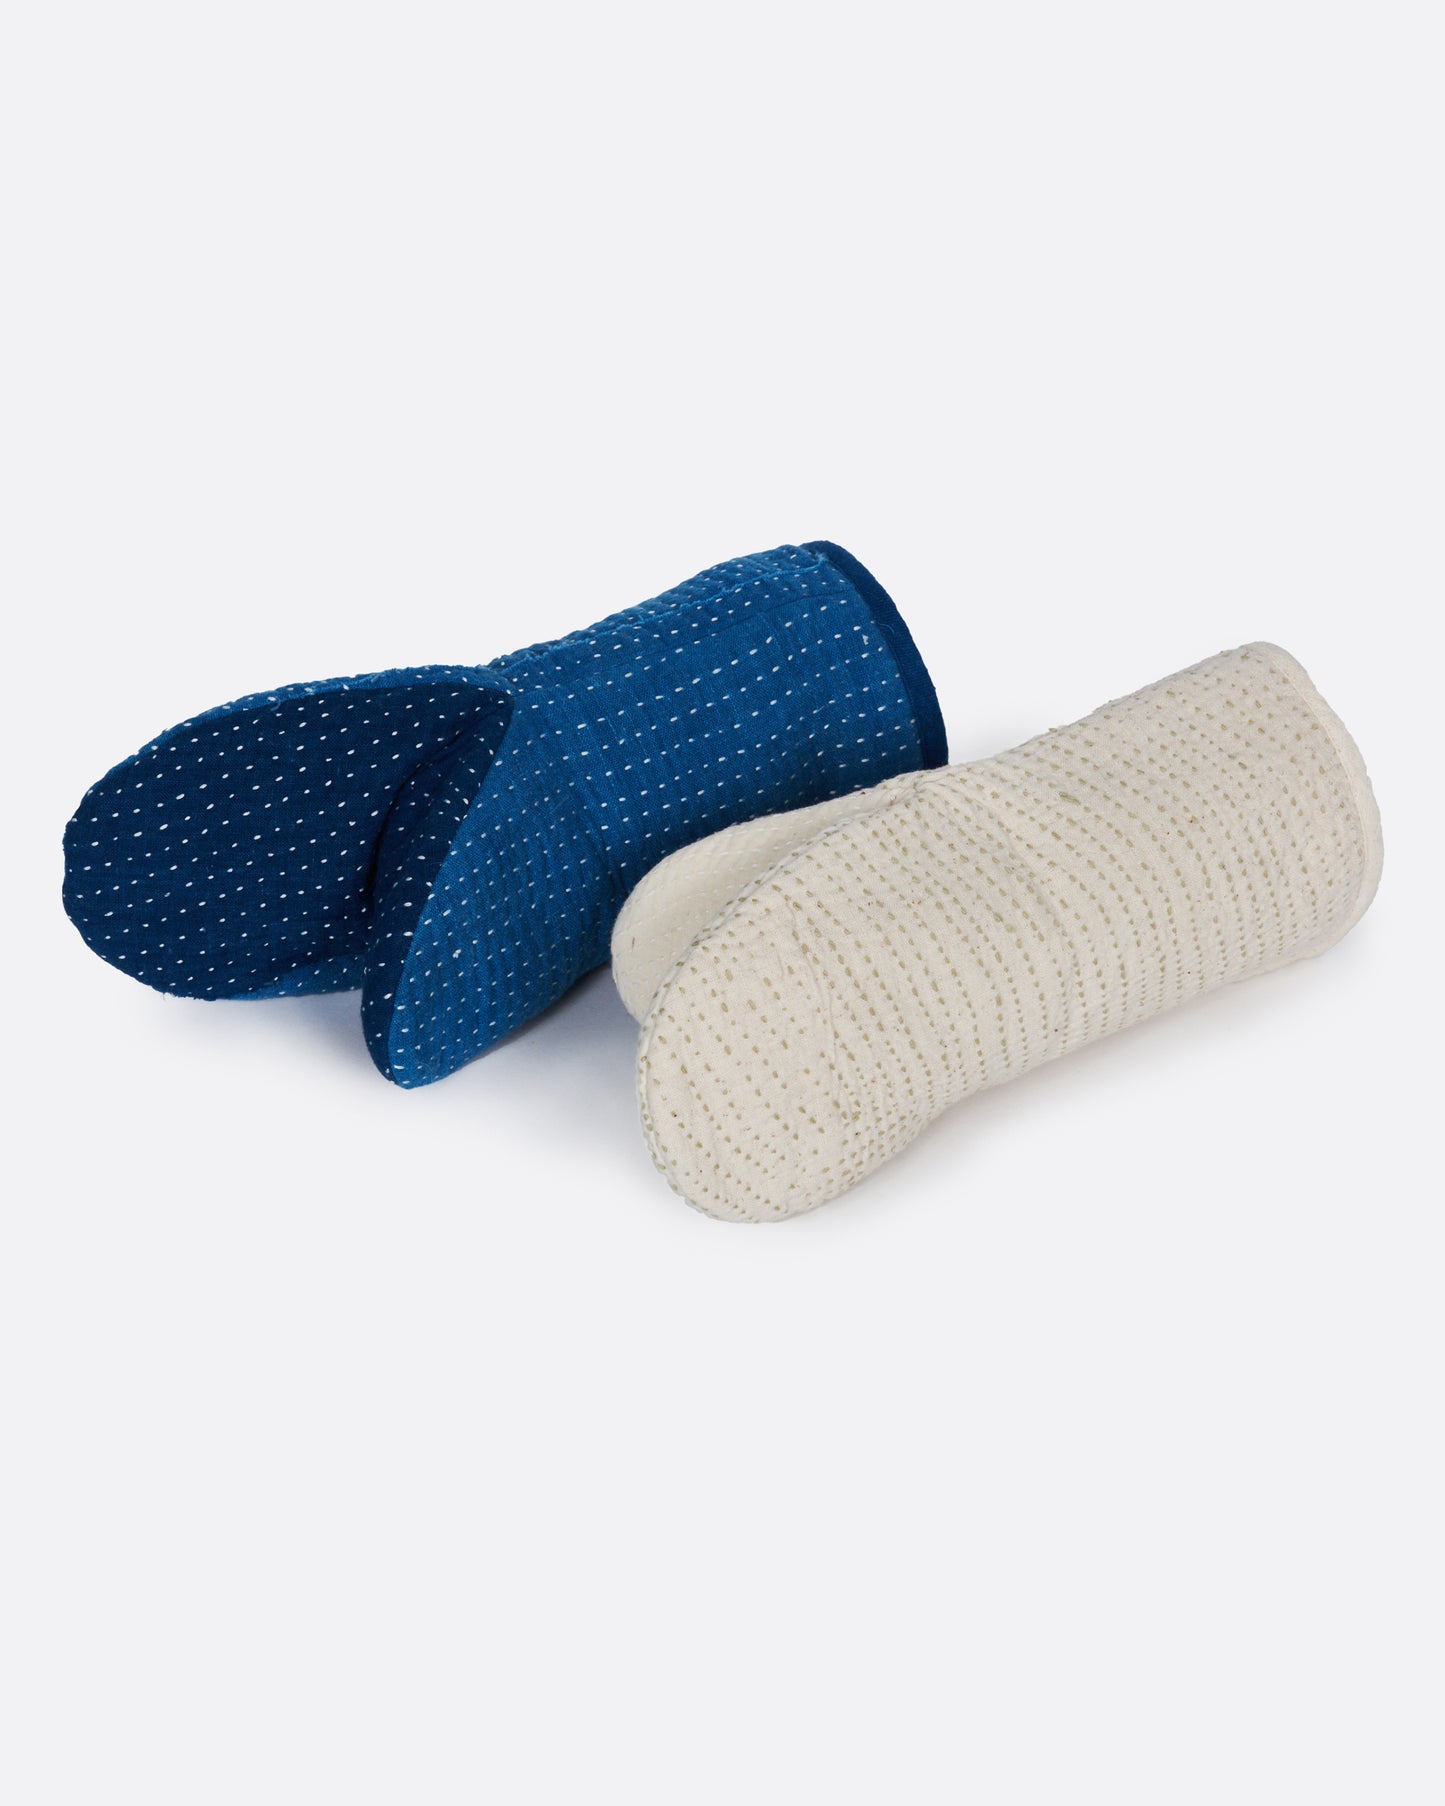 A pair of hand stitched oven mitts; one blue and one ivory.